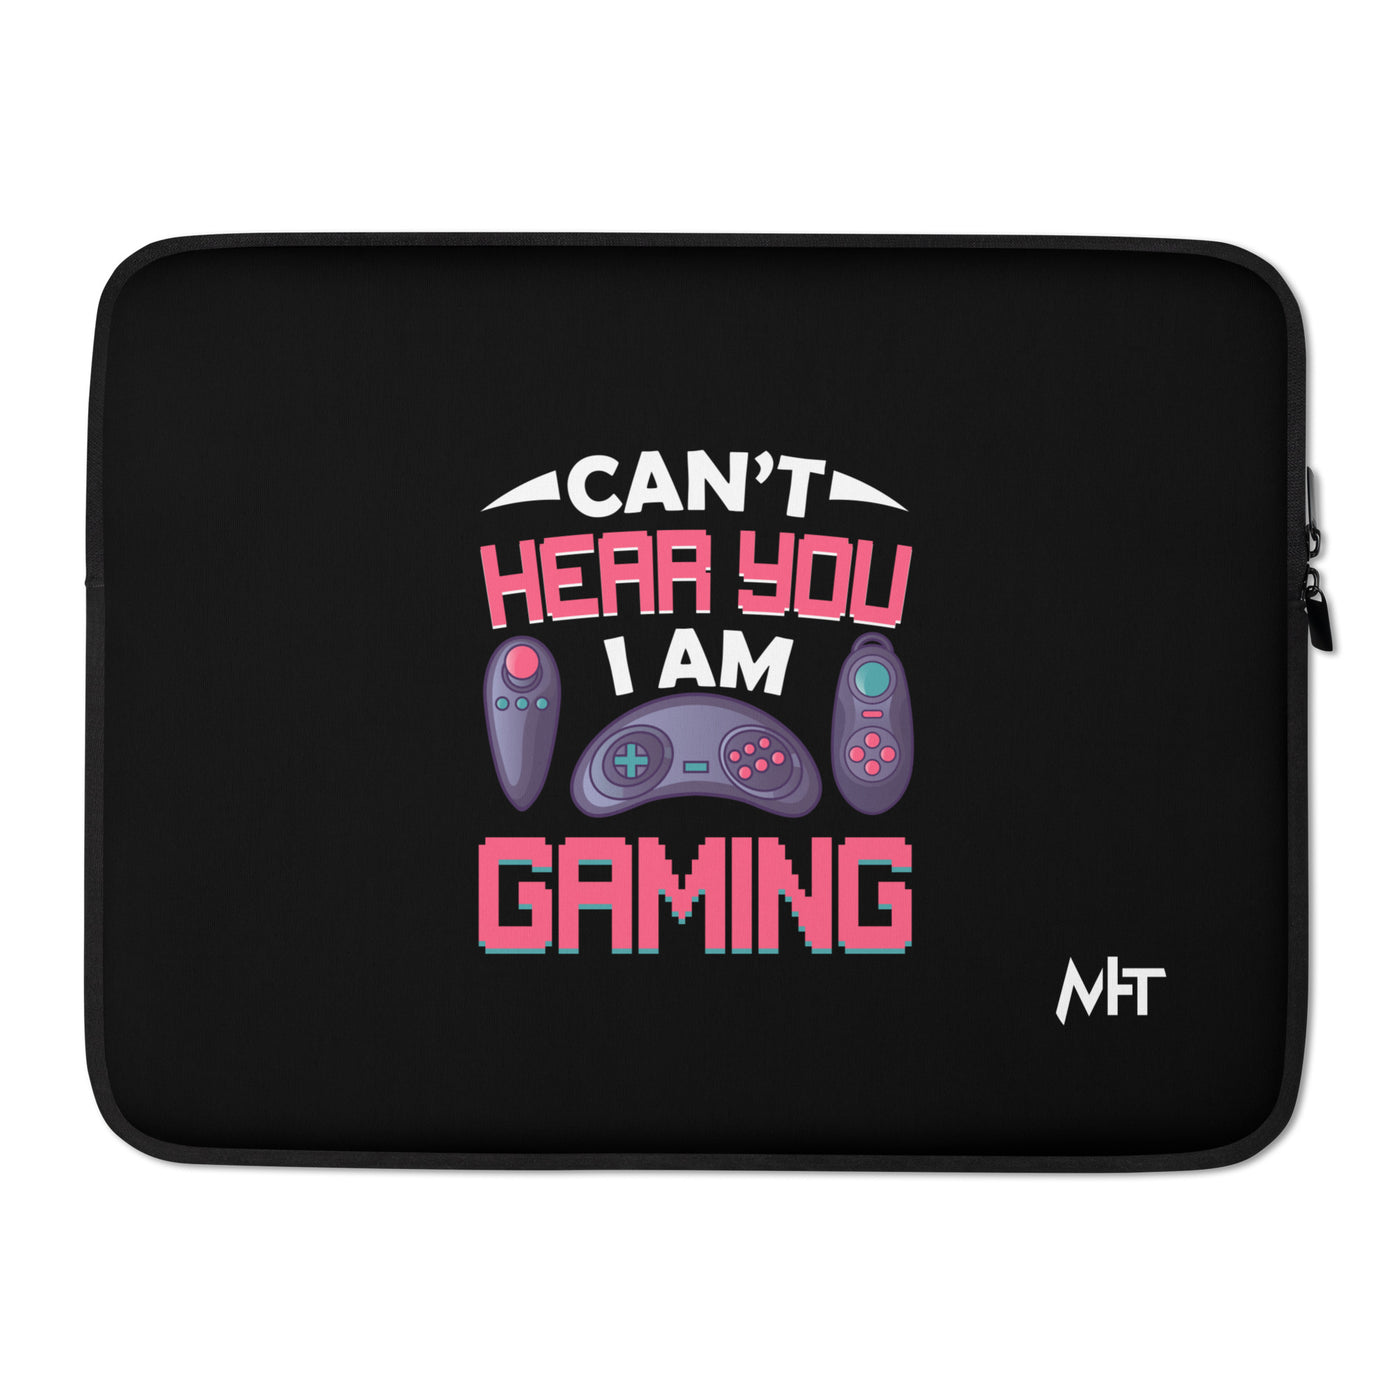 Can't Hear you, I am Gaming - Laptop Sleeve